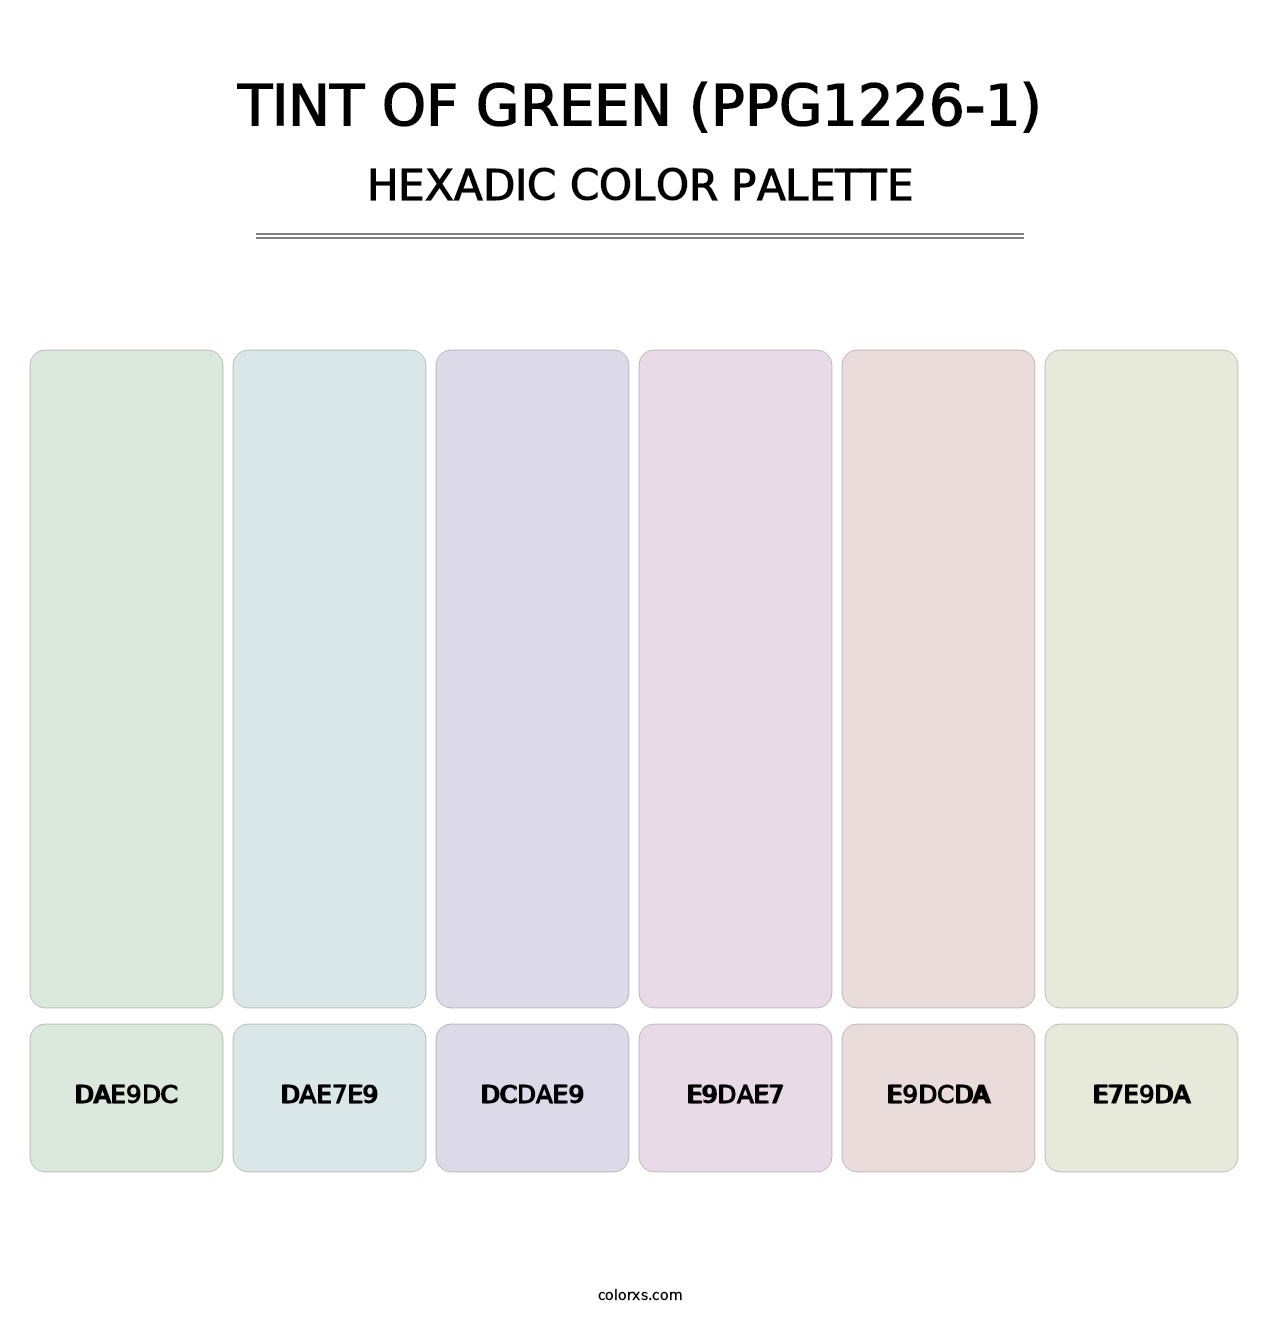 Tint Of Green (PPG1226-1) - Hexadic Color Palette